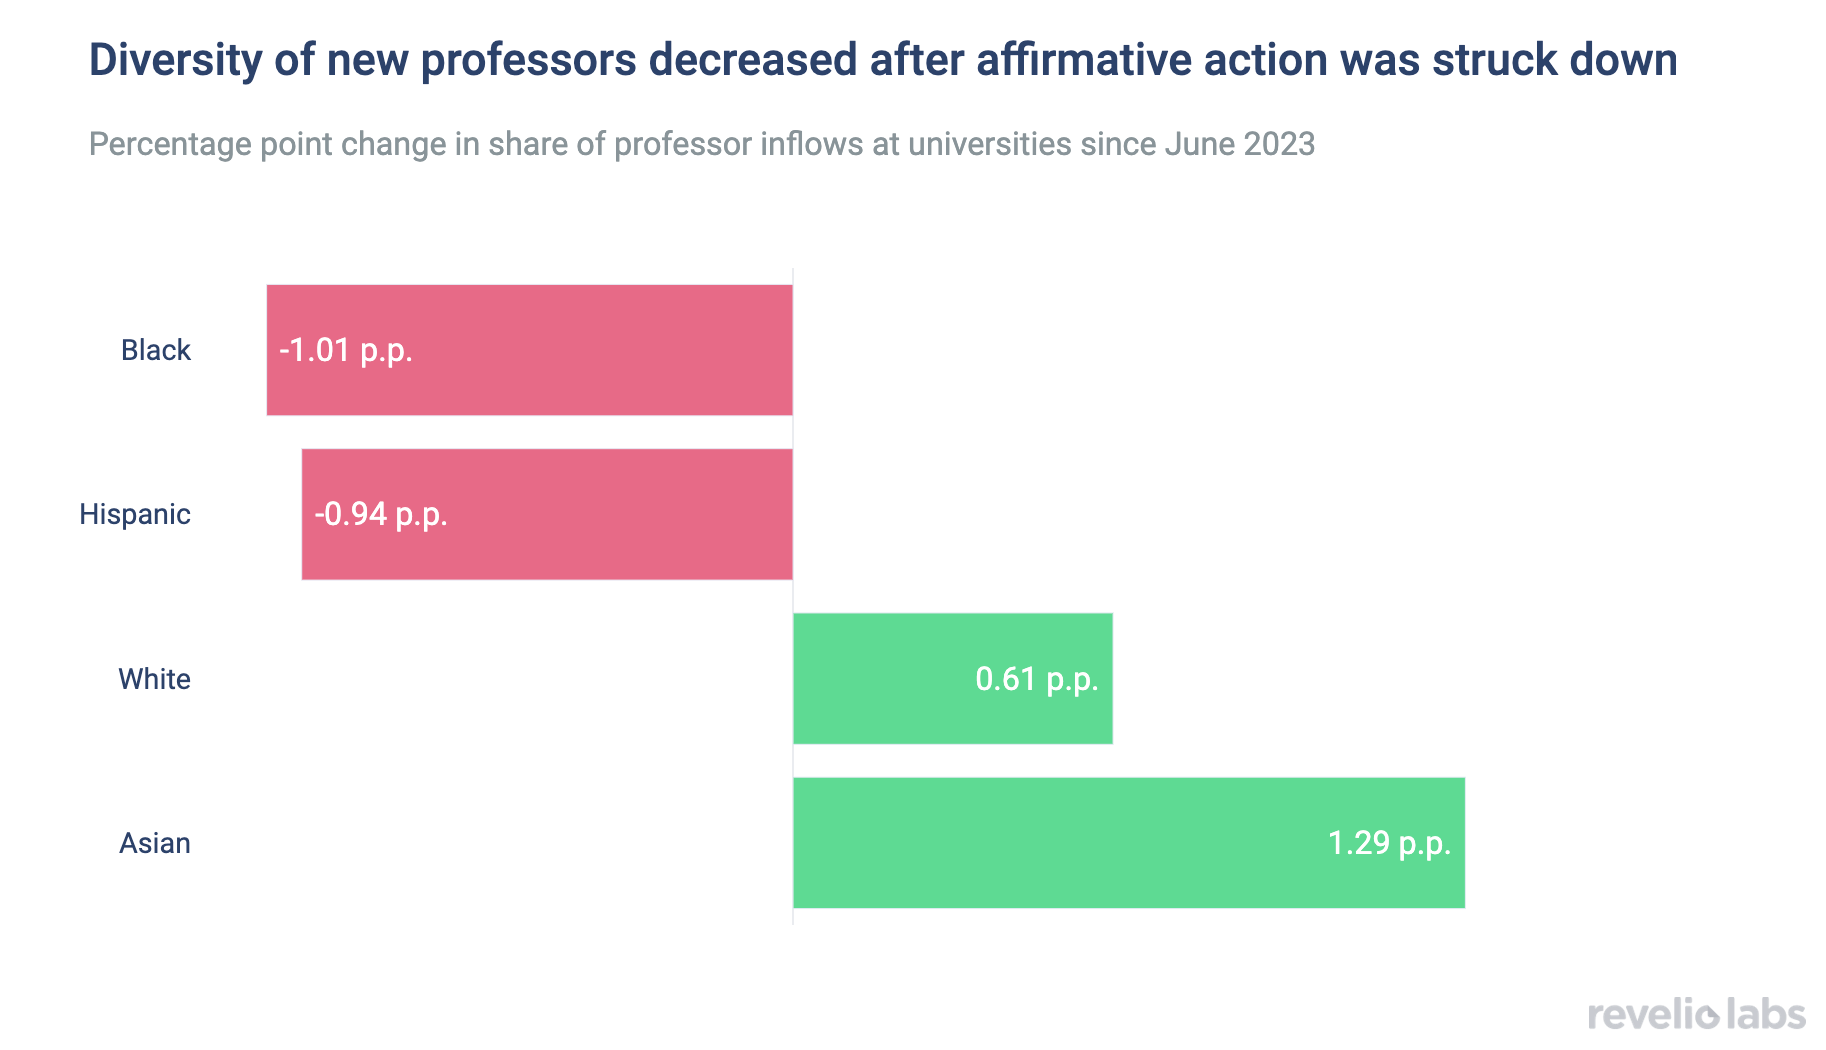 Diversity of new professors decreased after affirmative action was struck down